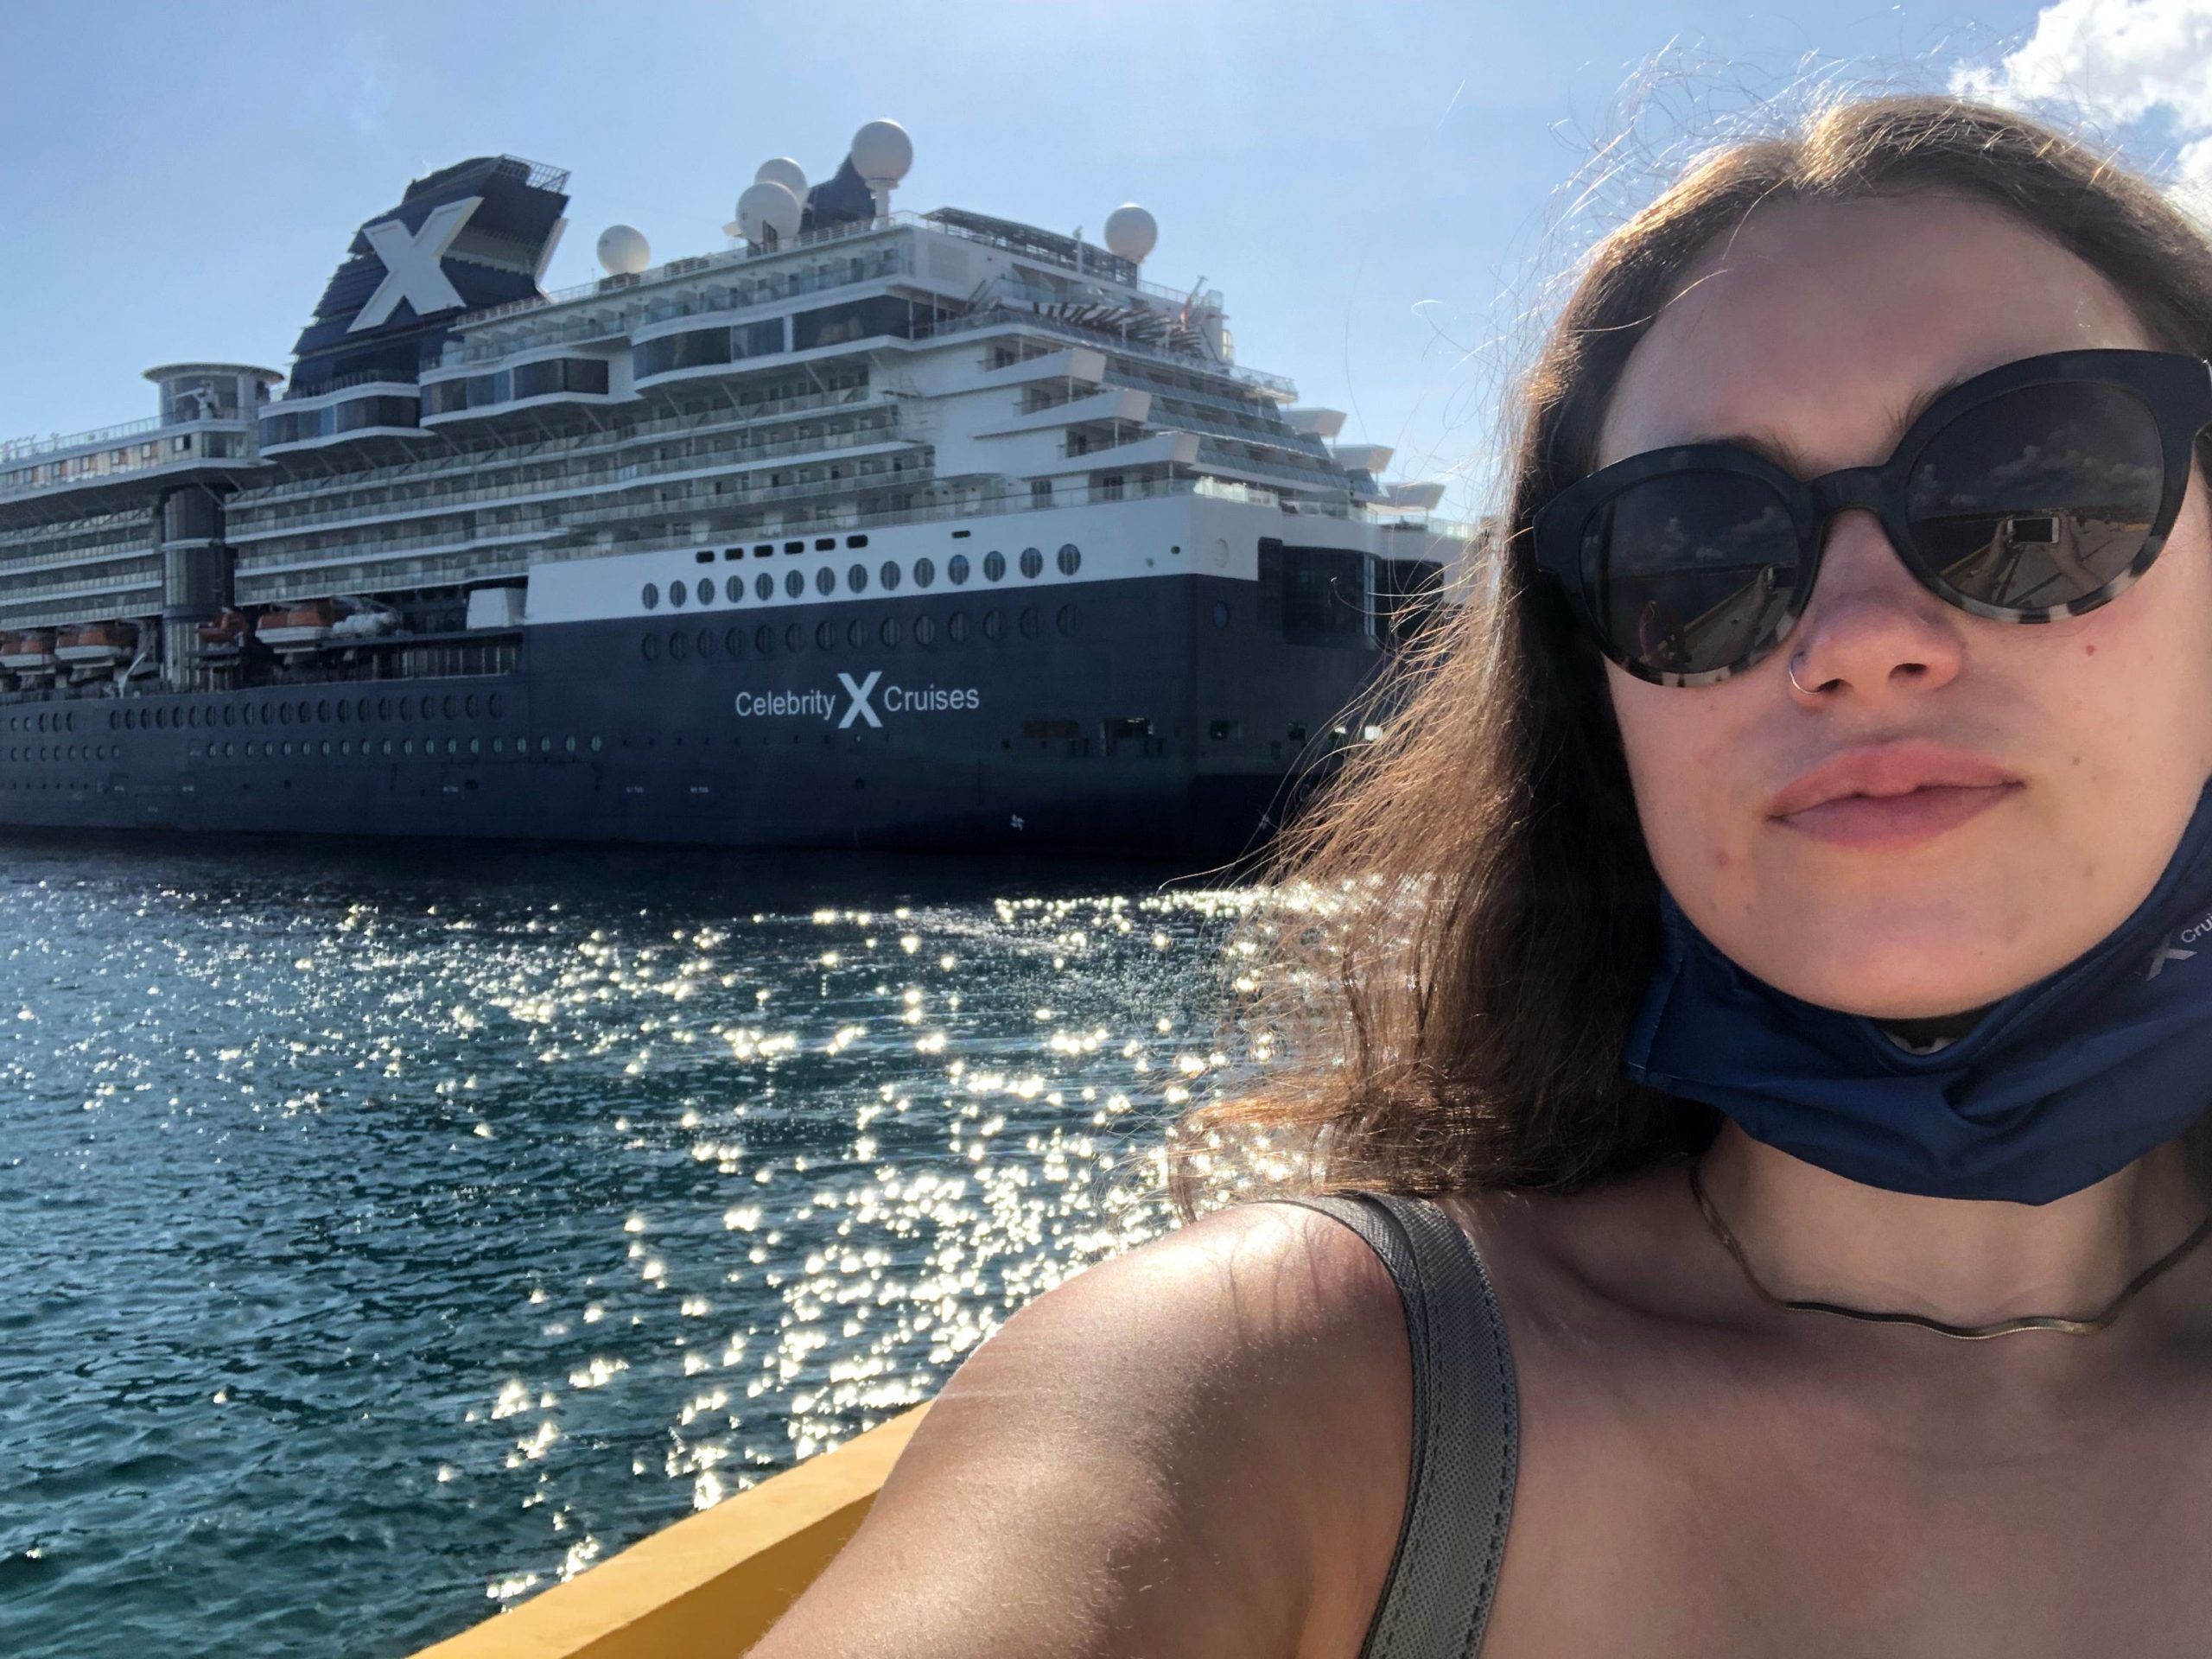 In a selfie, the author wears sunglasses and shows the navy blue and white cruise ship docked behind her.